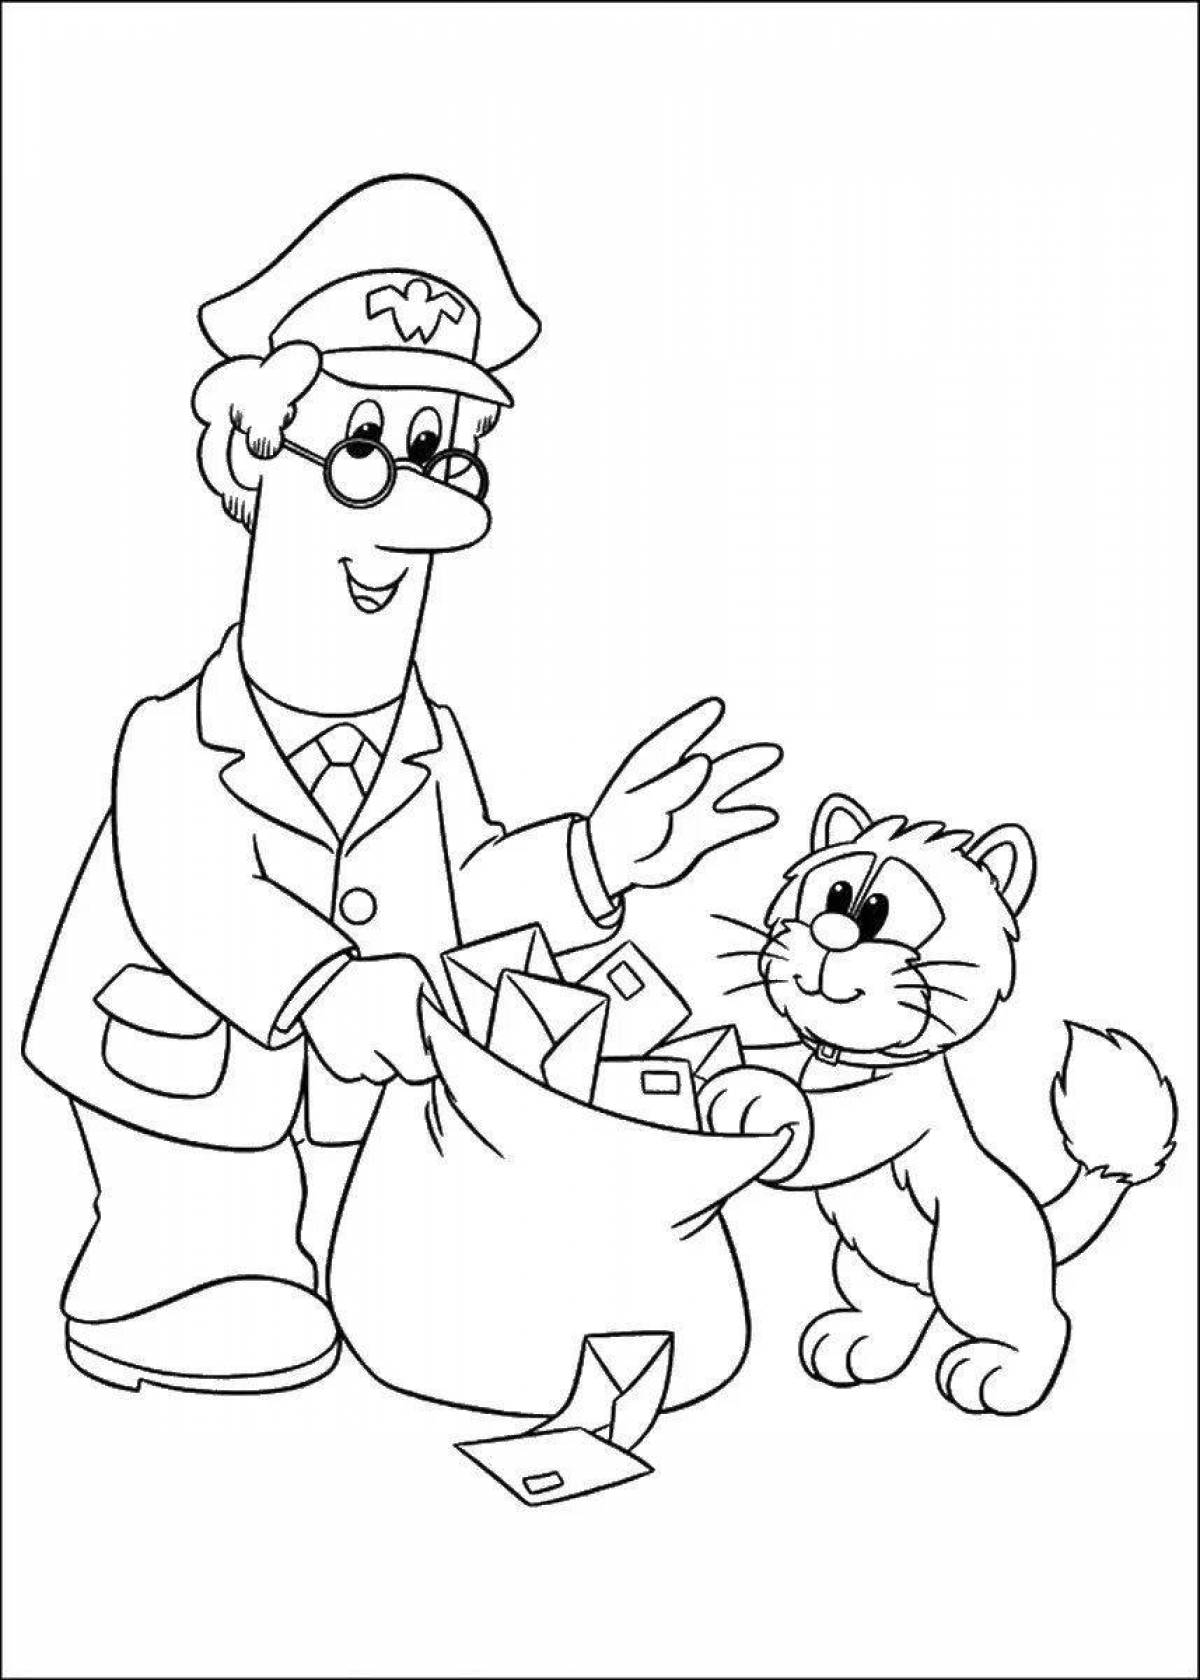 Colorful postal coloring book for kids